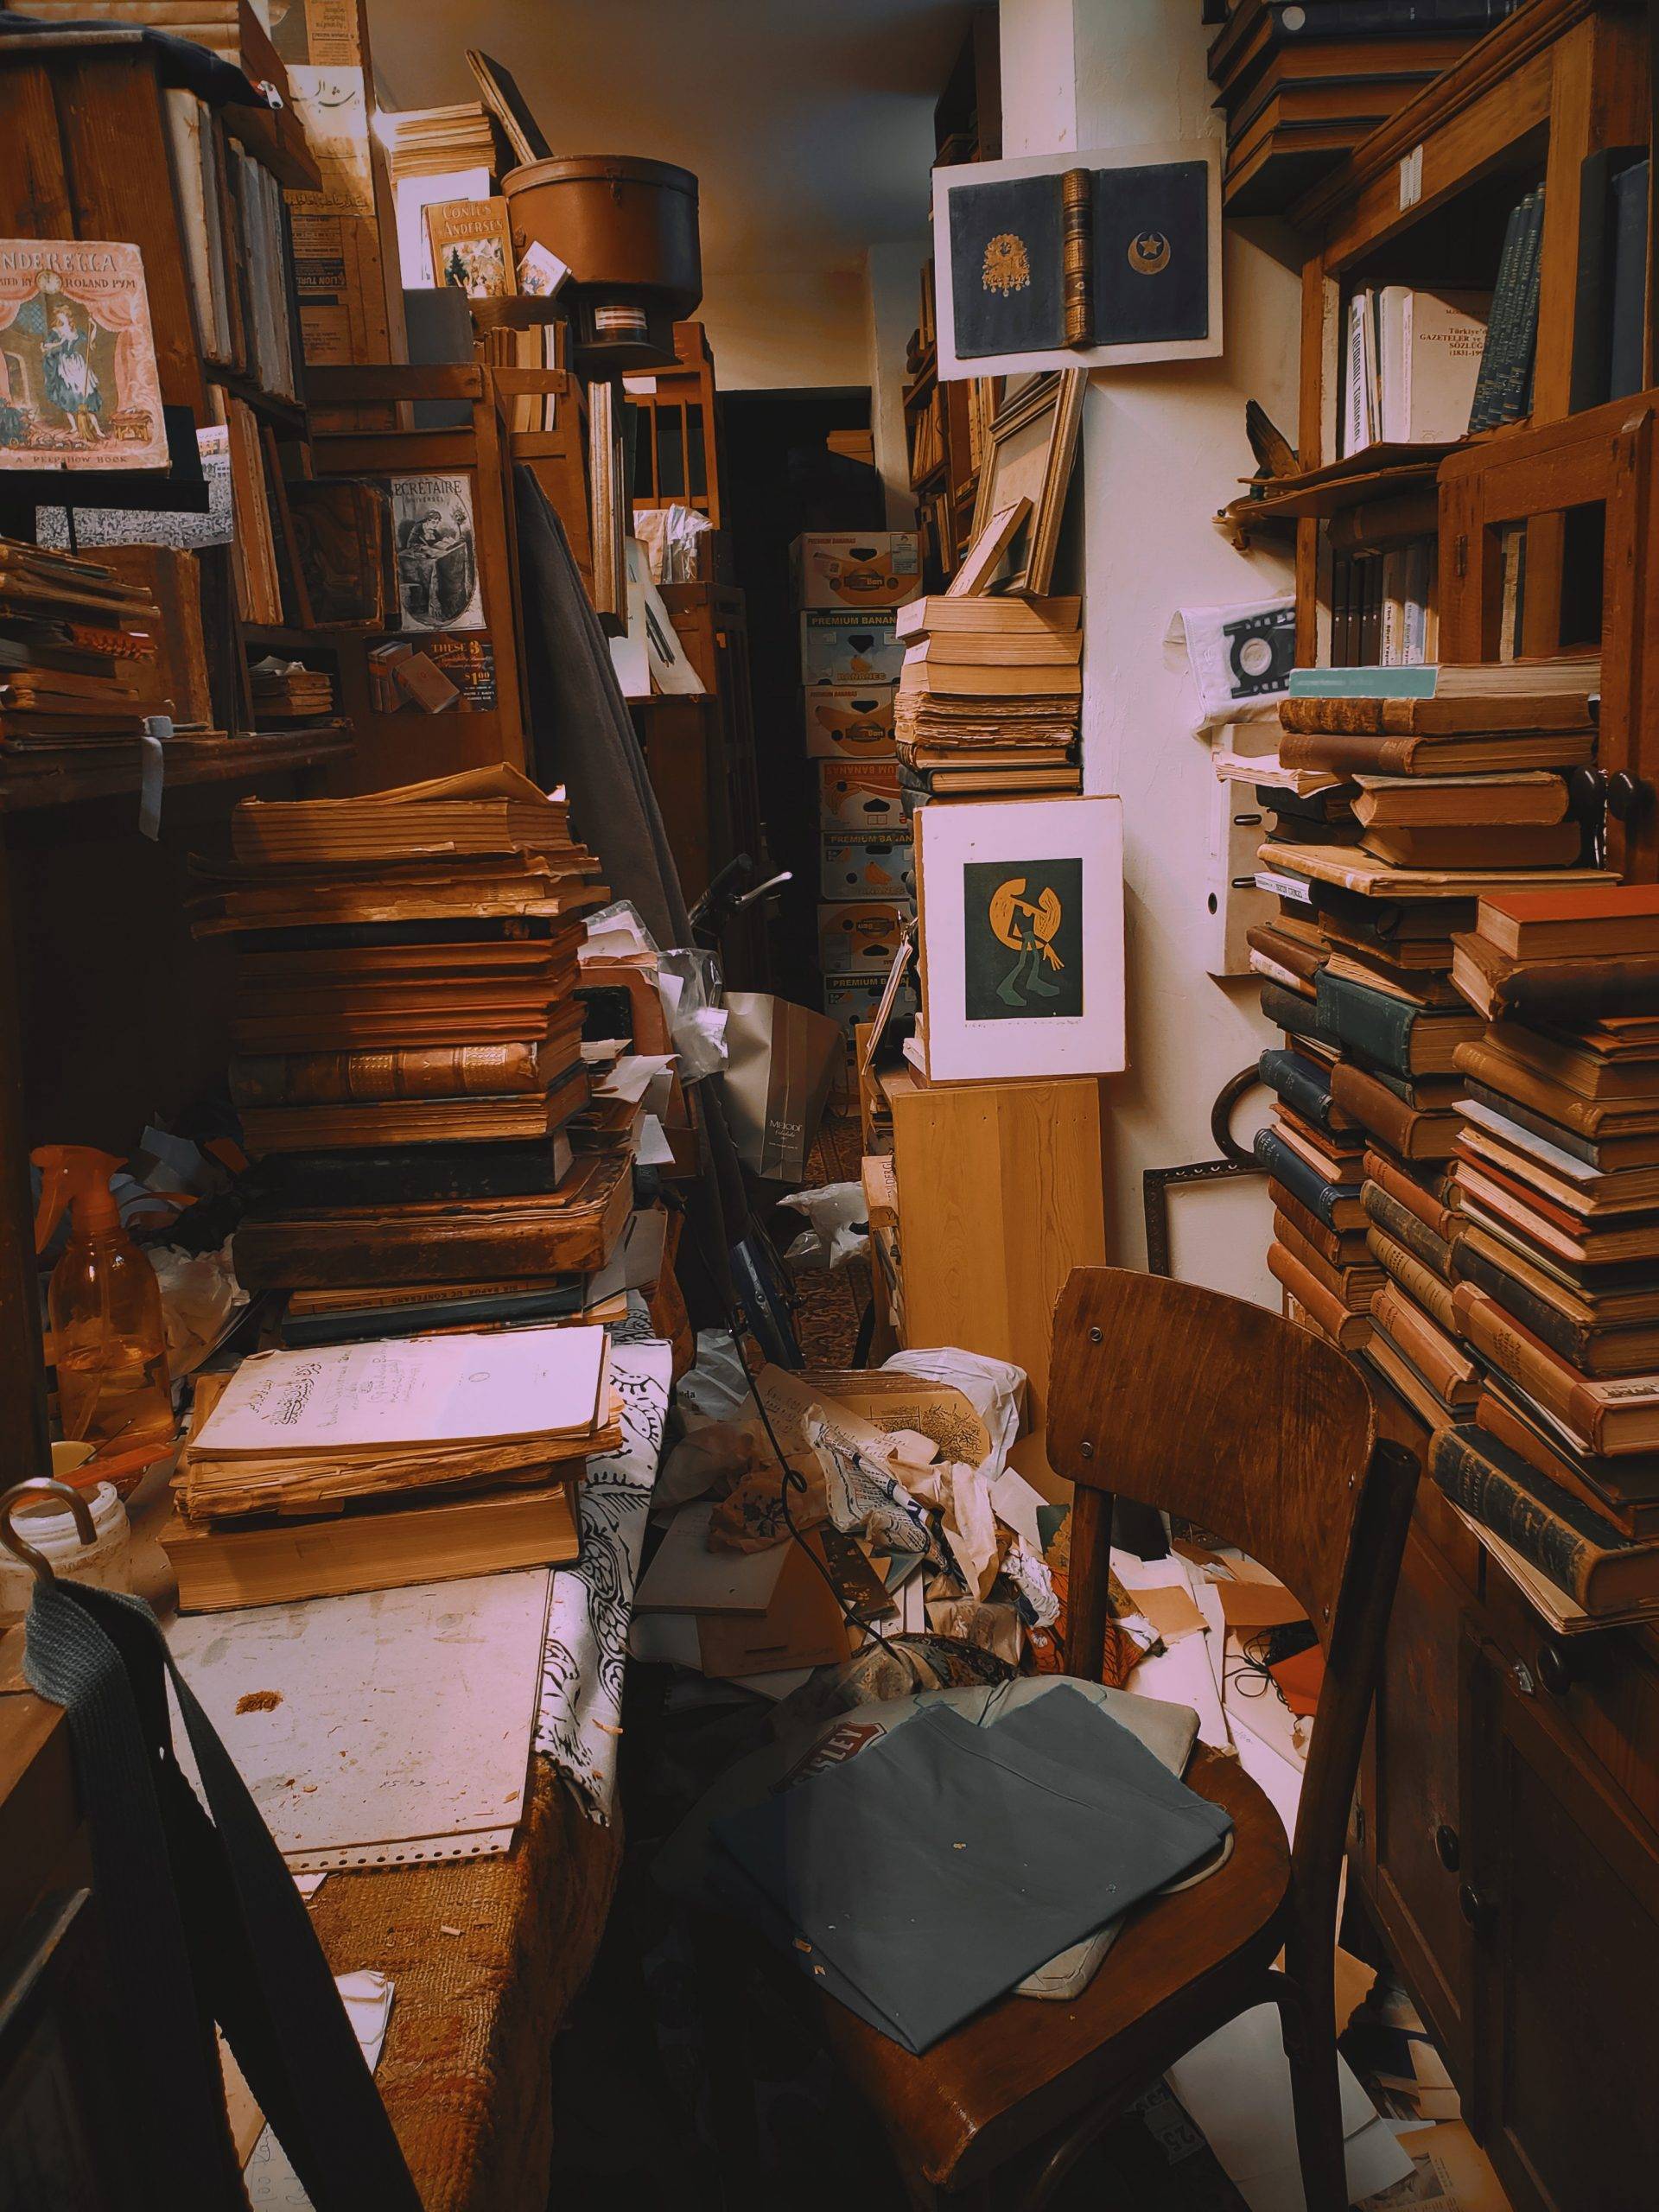 An office filled with lots of clutter like books and paper